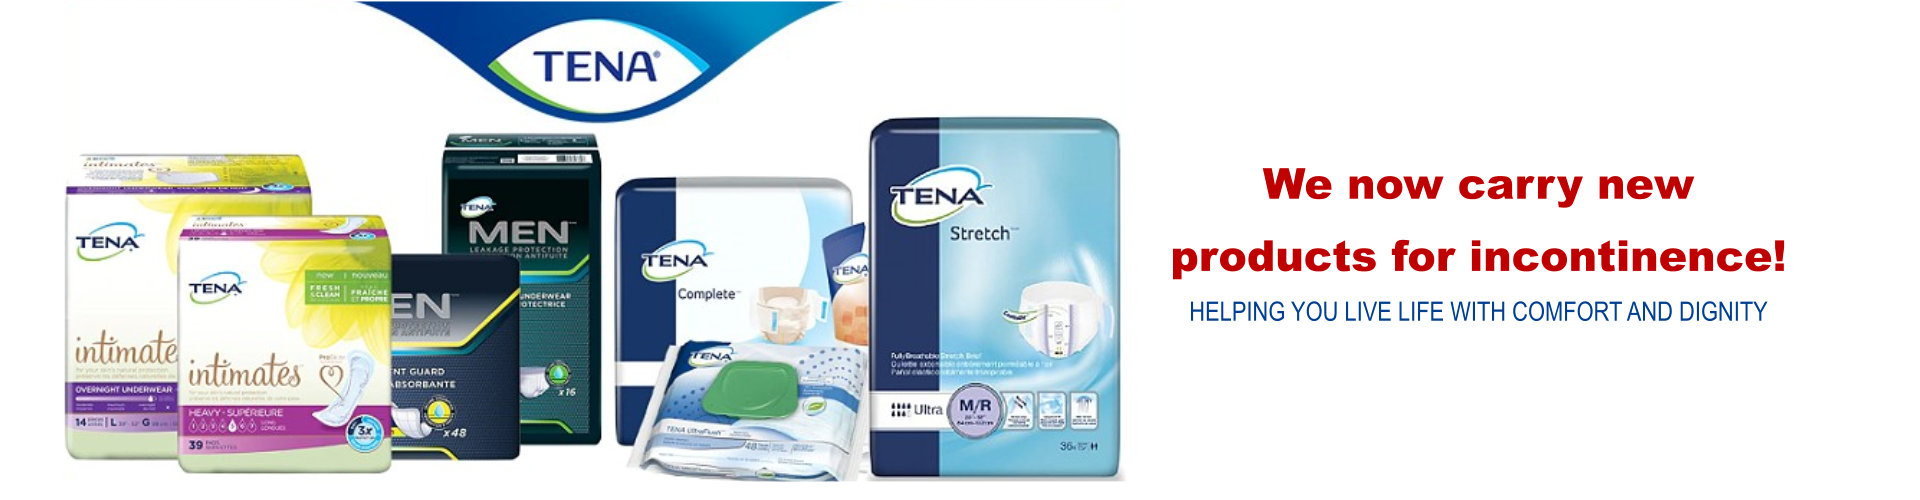 tena products for incontinence tornoto